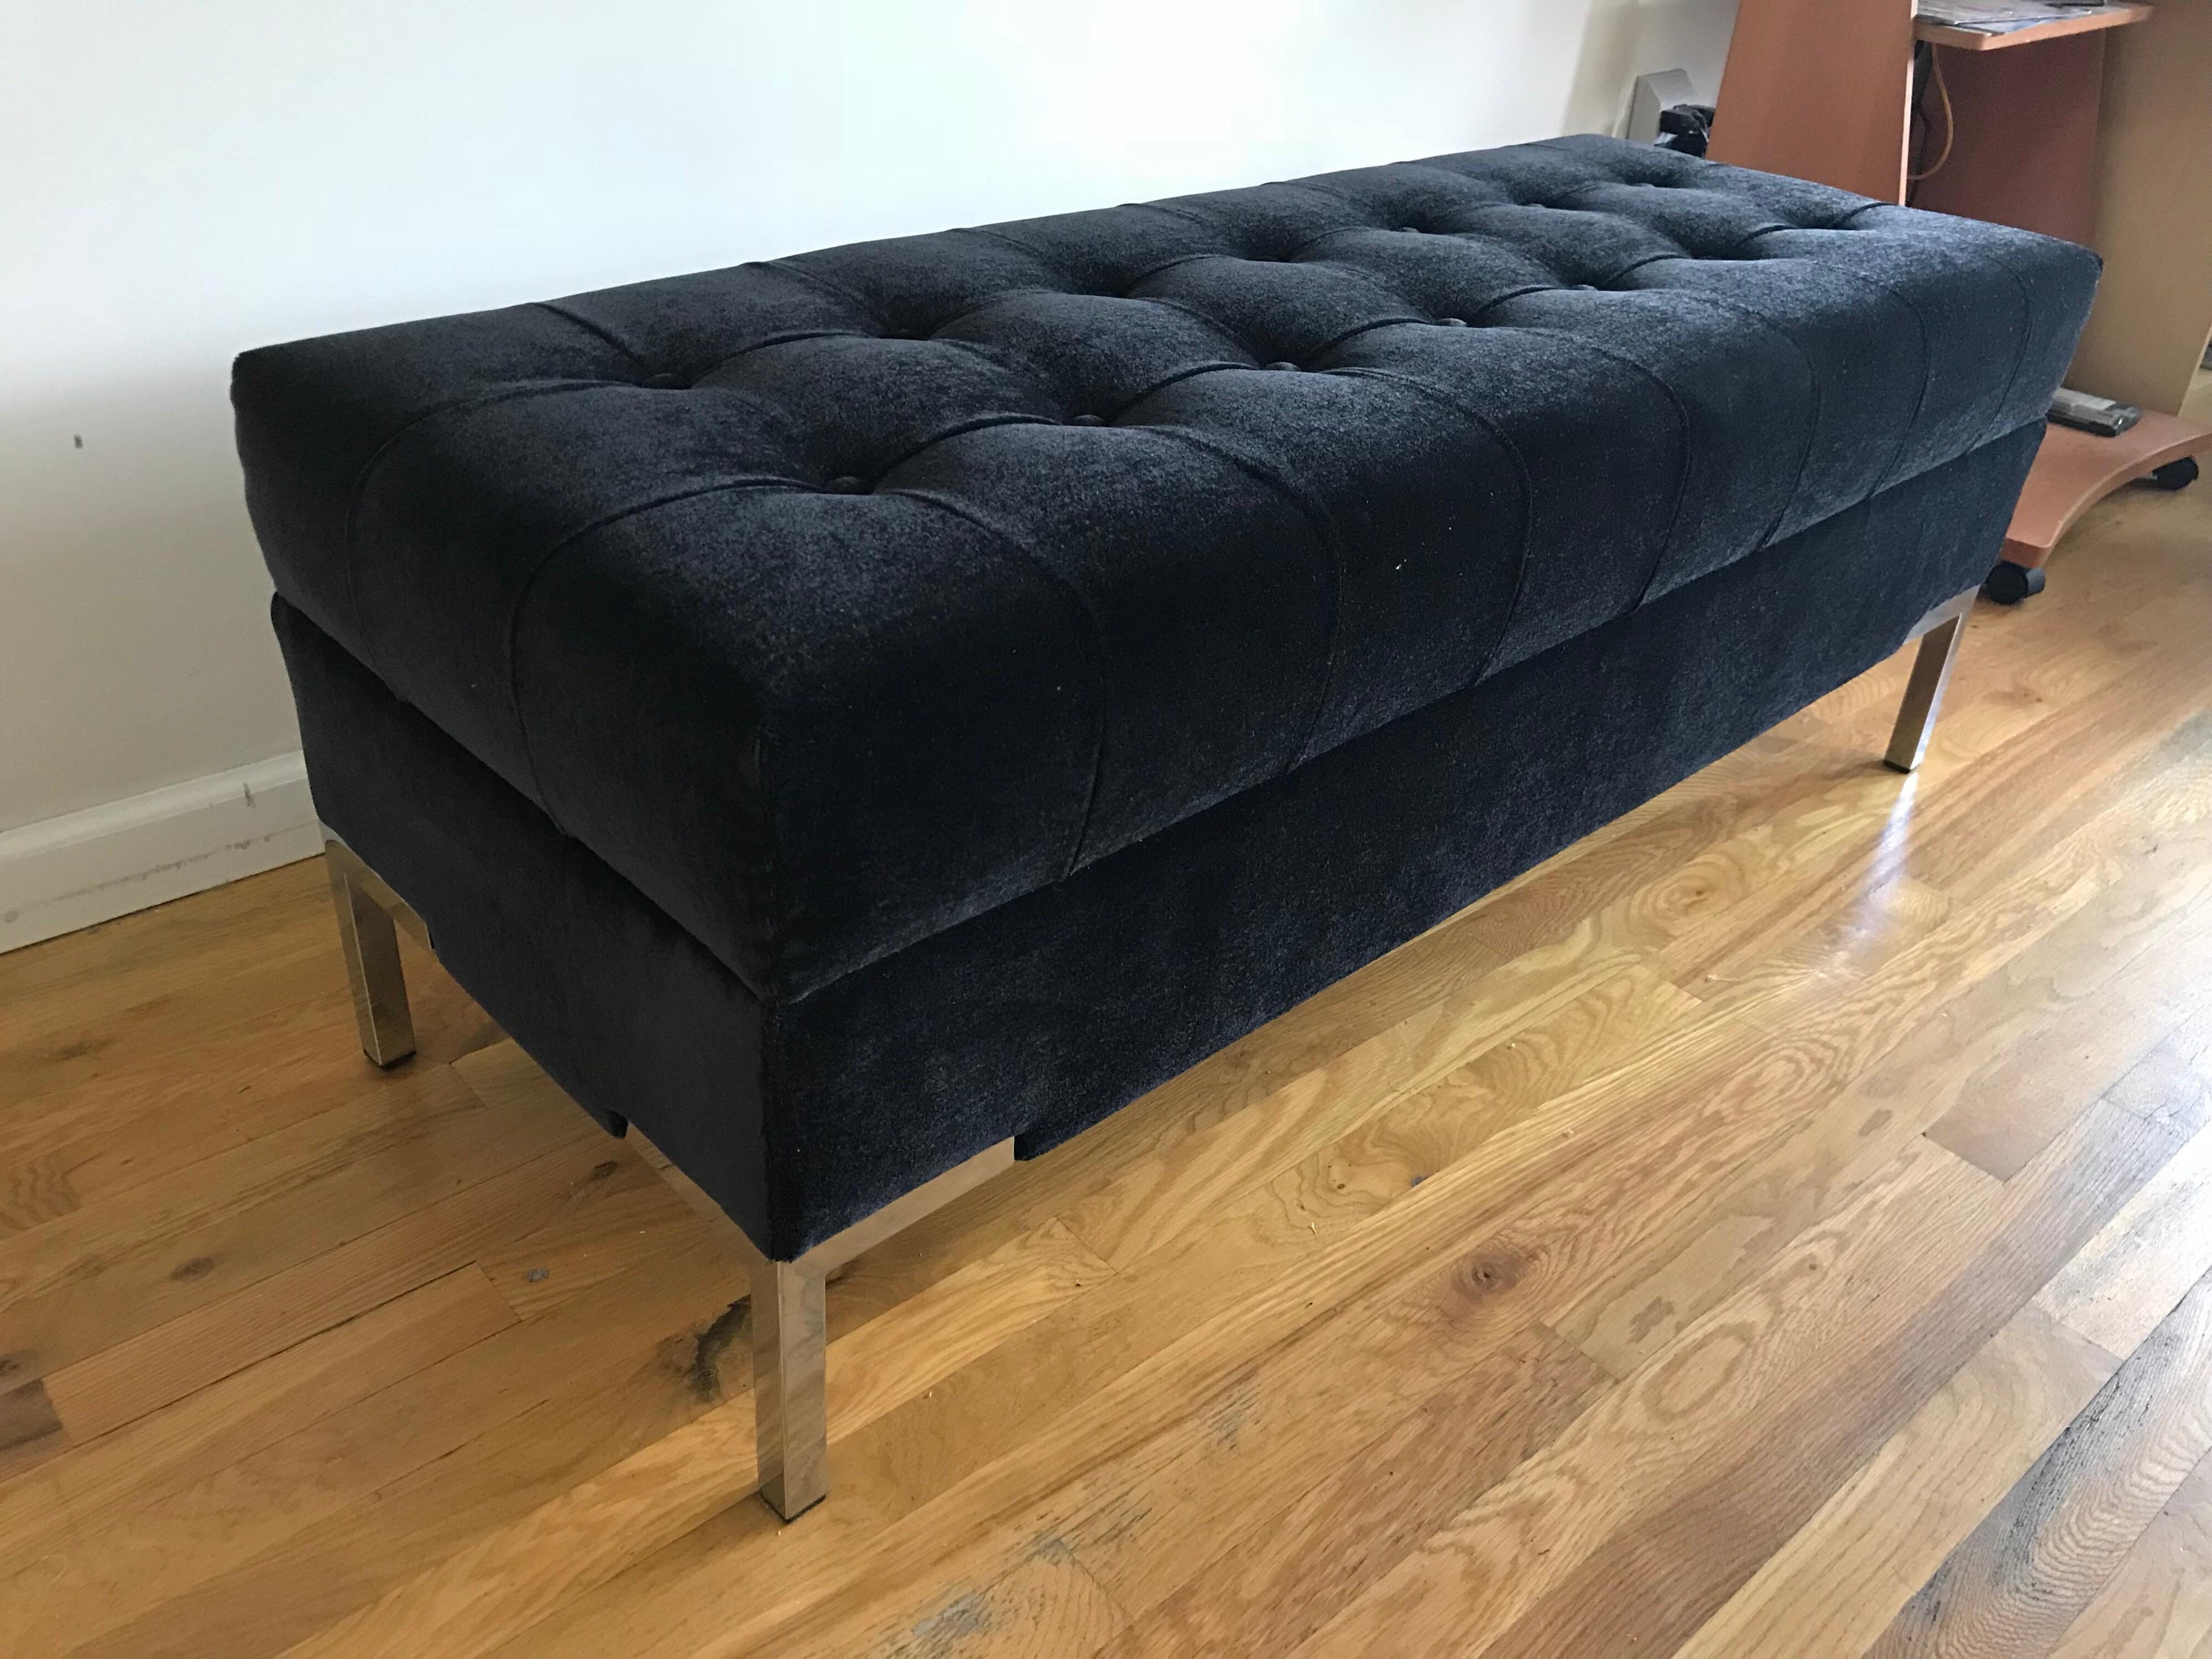 Custom integrated leg mohair midcentury style bench,  in rich dark charcoal mohair, with buttons and seaming. With chrome legs. This bench was made custom for local designer, was ordered in the wrong size. Available immediately
